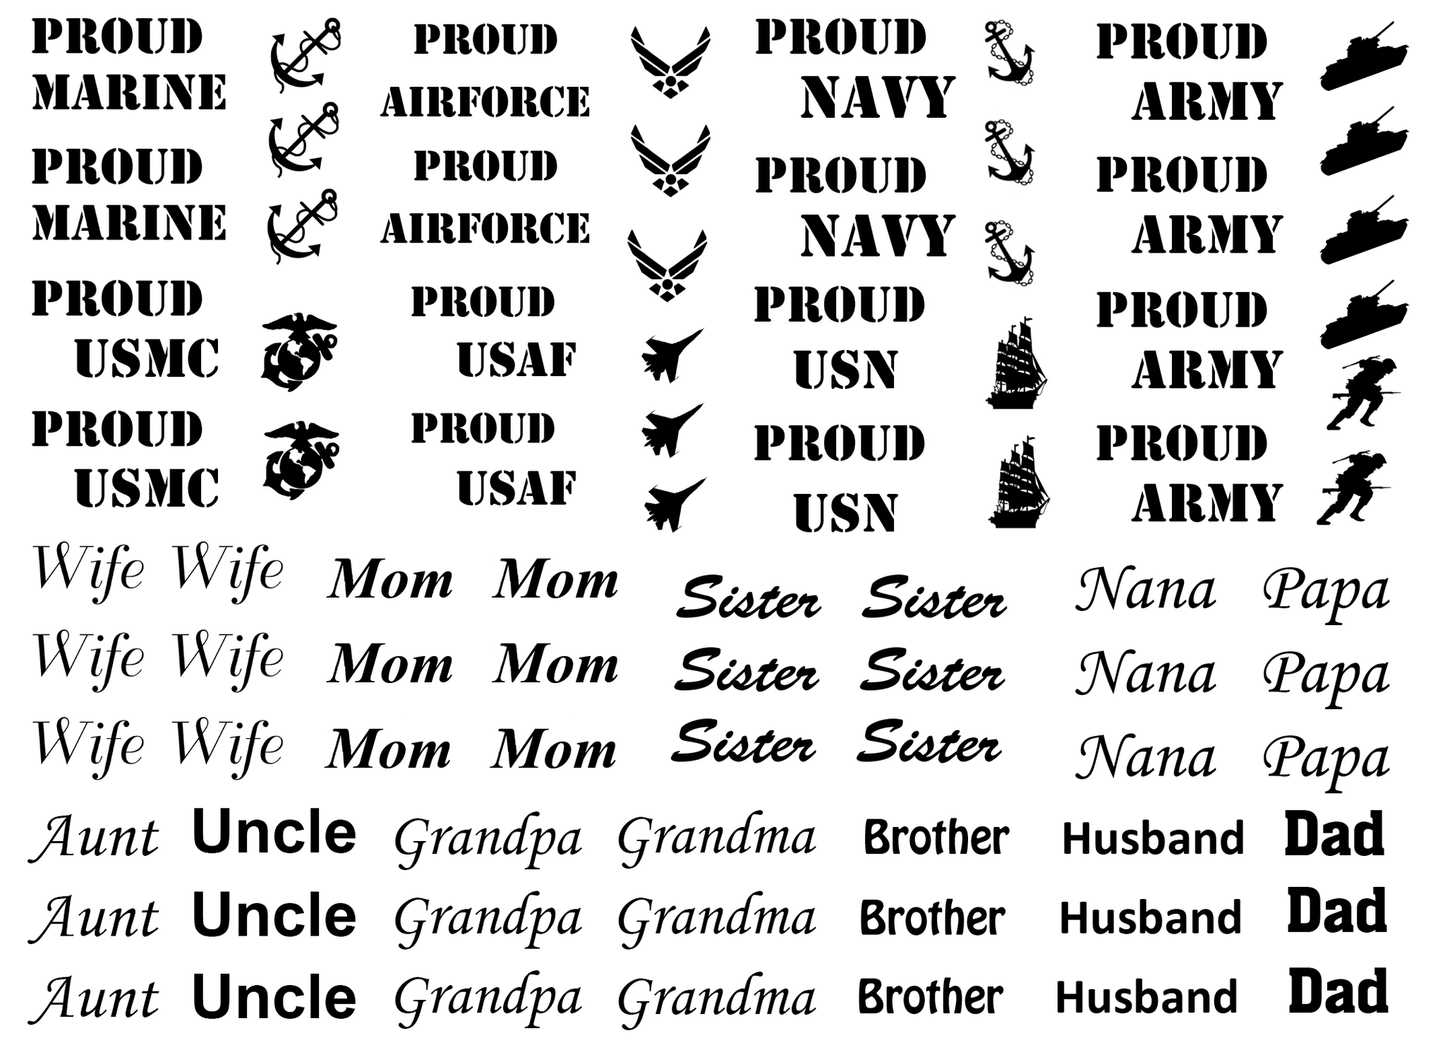 Military Proud 28 pcs 1" to 1-1/4" Black Fused Glass Decals